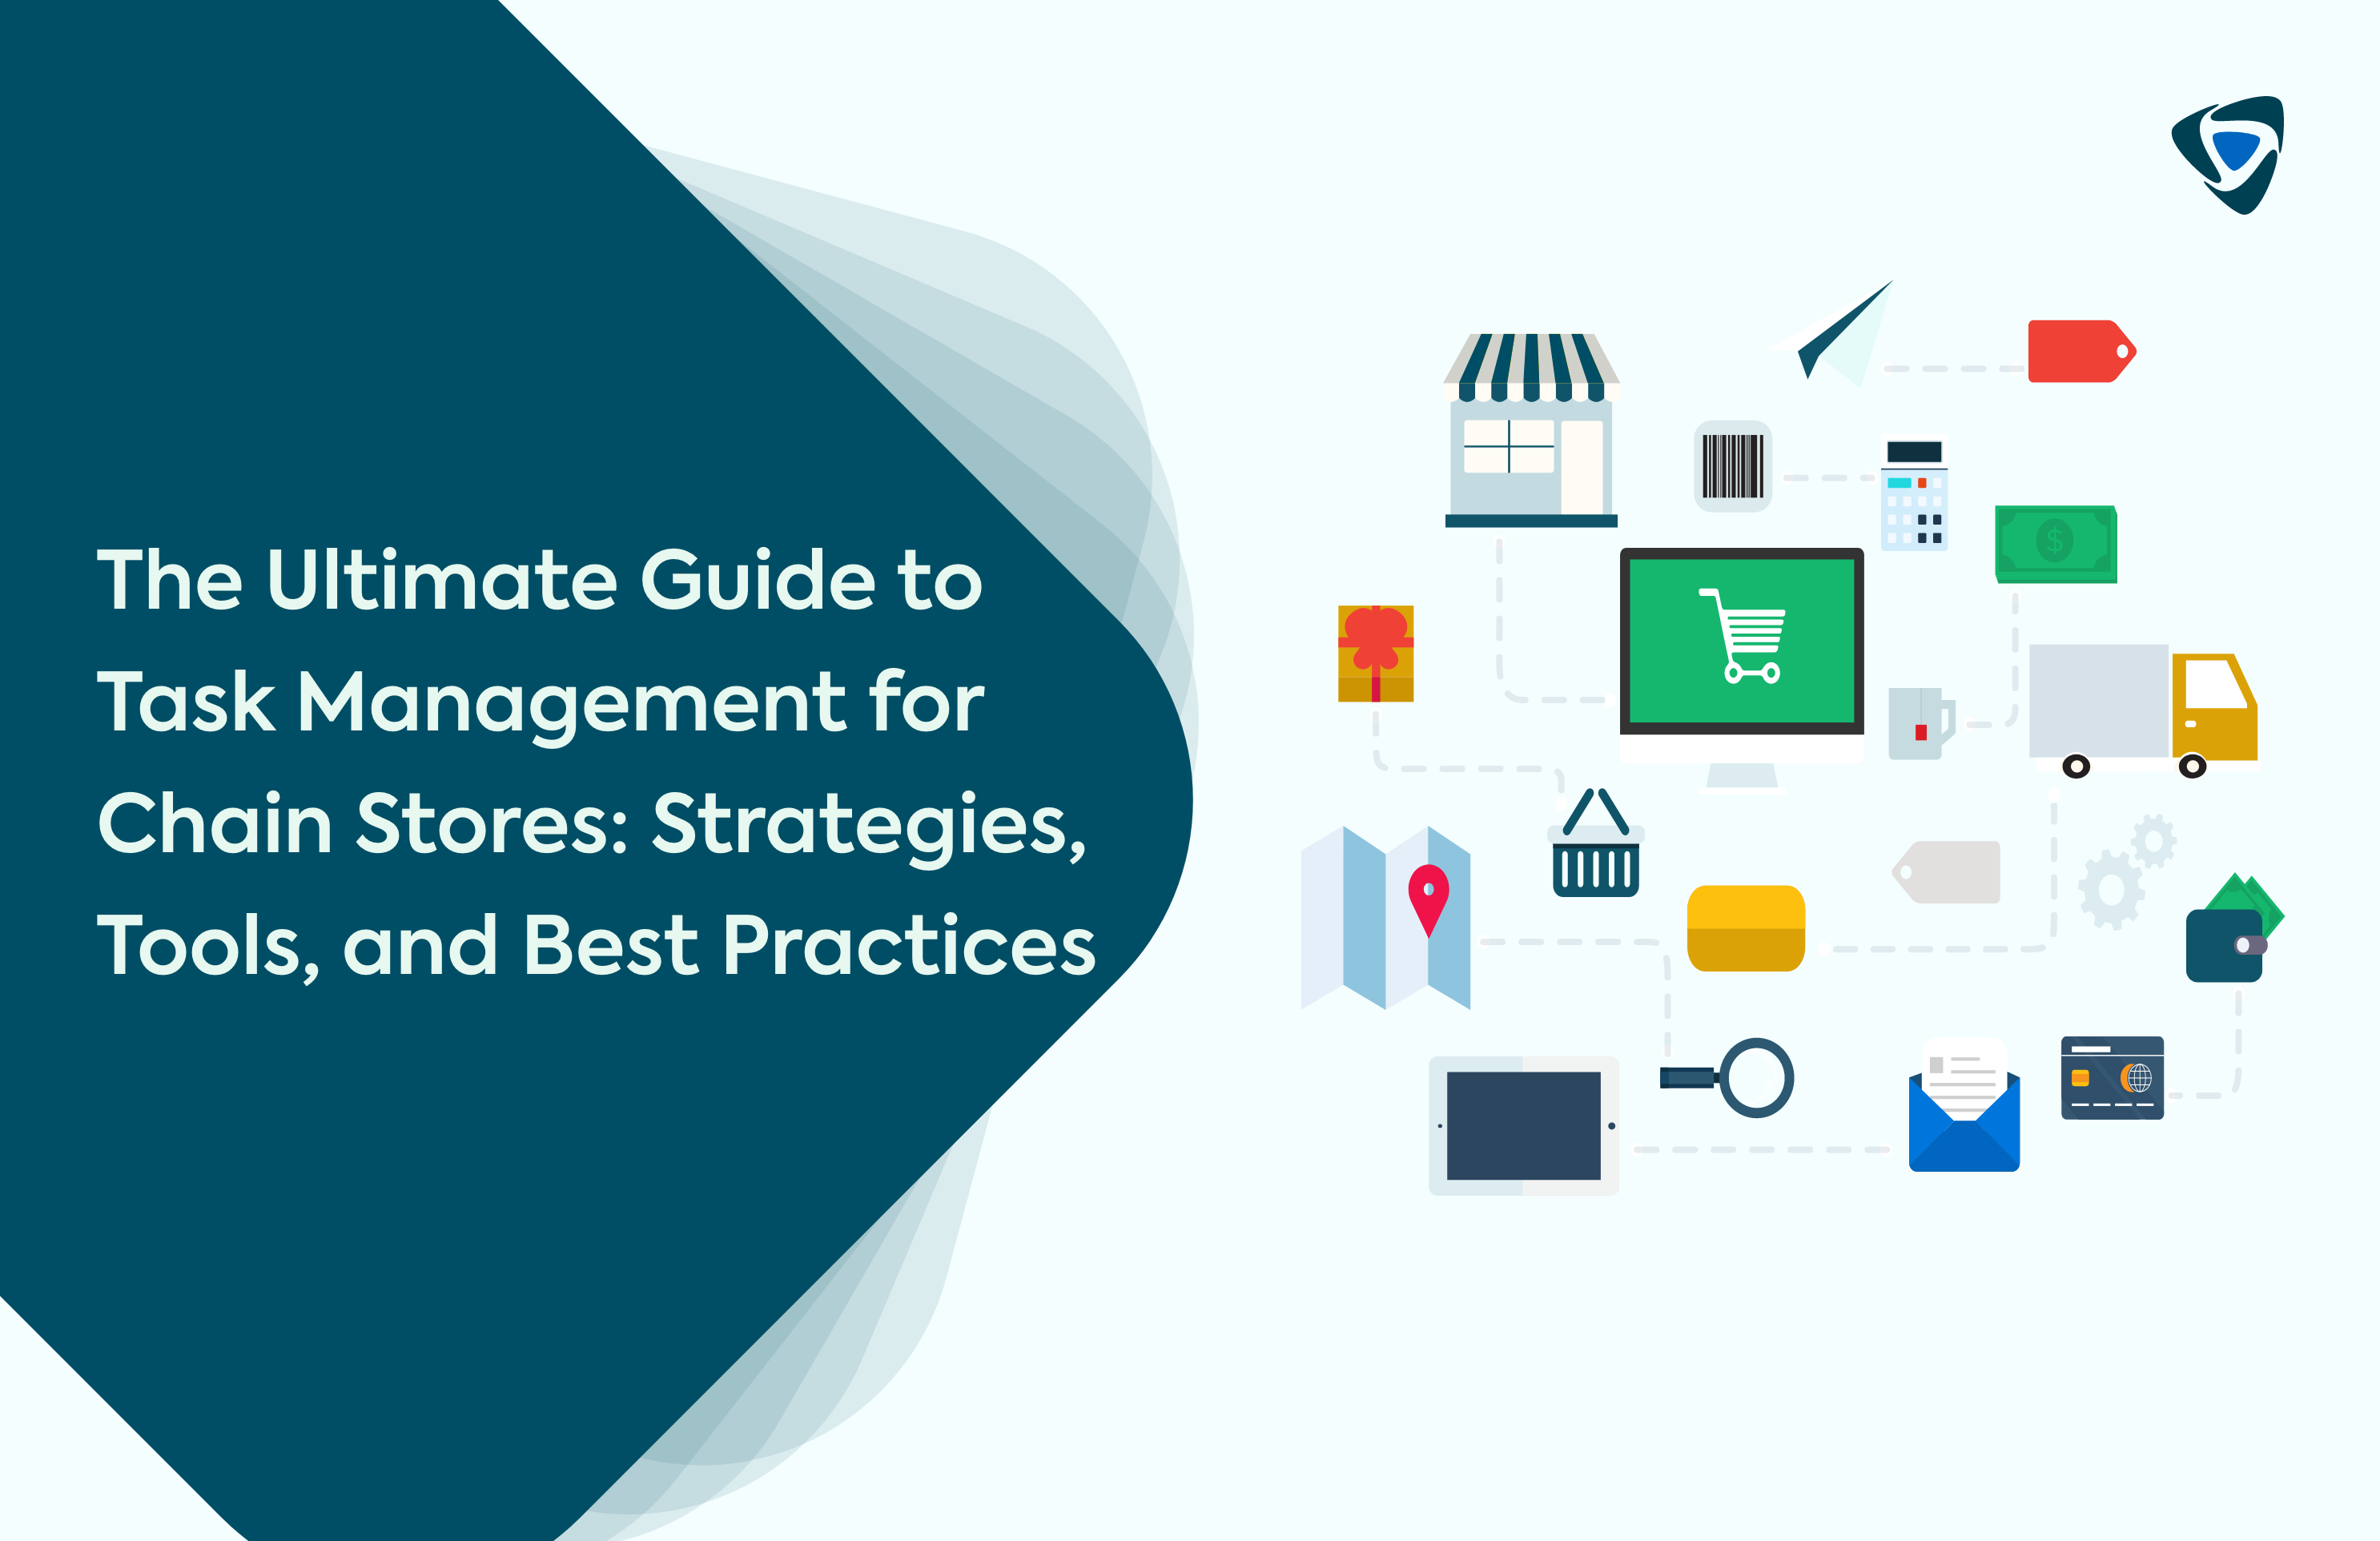 The Ultimate Guide to Task Management for Chain Stores: Strategies, Tools, and Best Practices